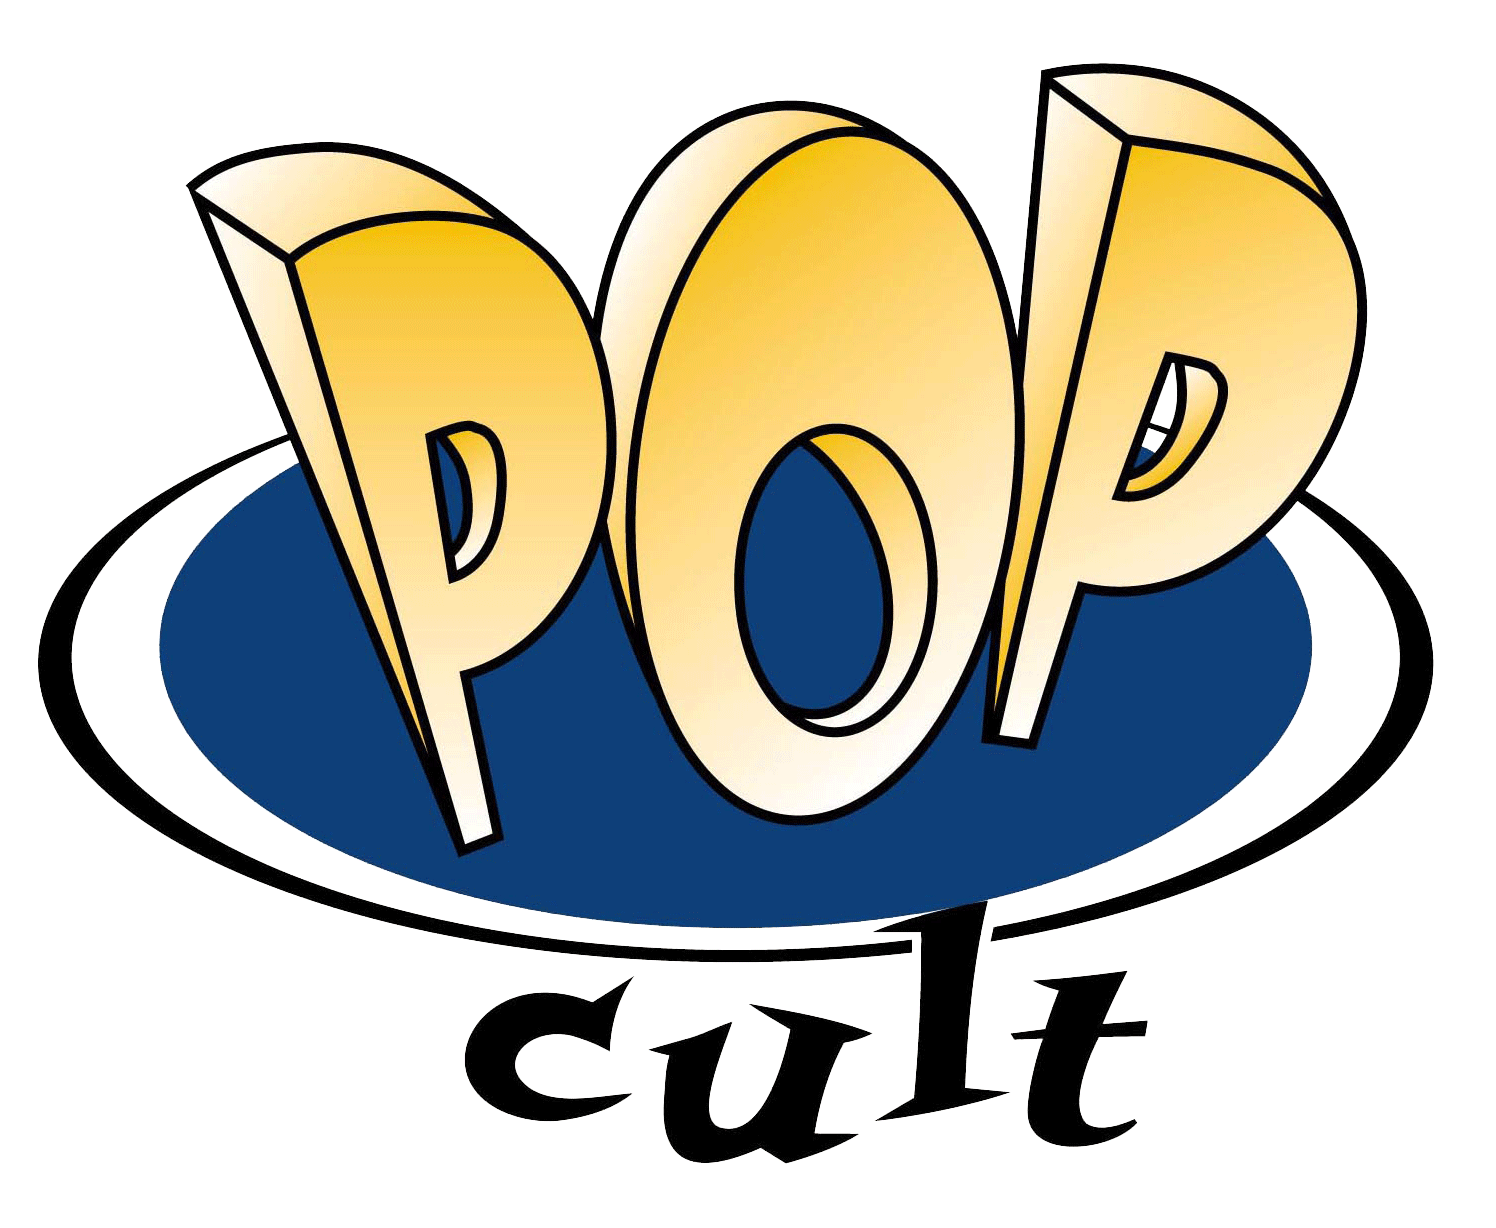 Popcult the obsessive journal. Hillbilly clipart hee haw